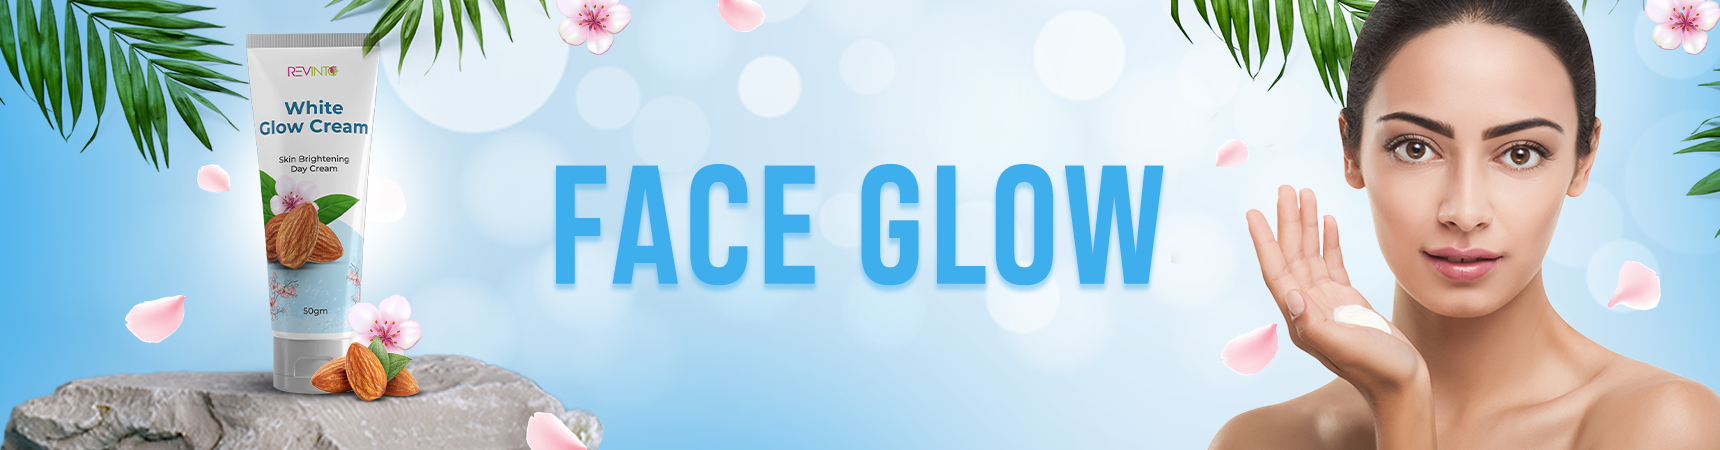 Face glow bannerV2